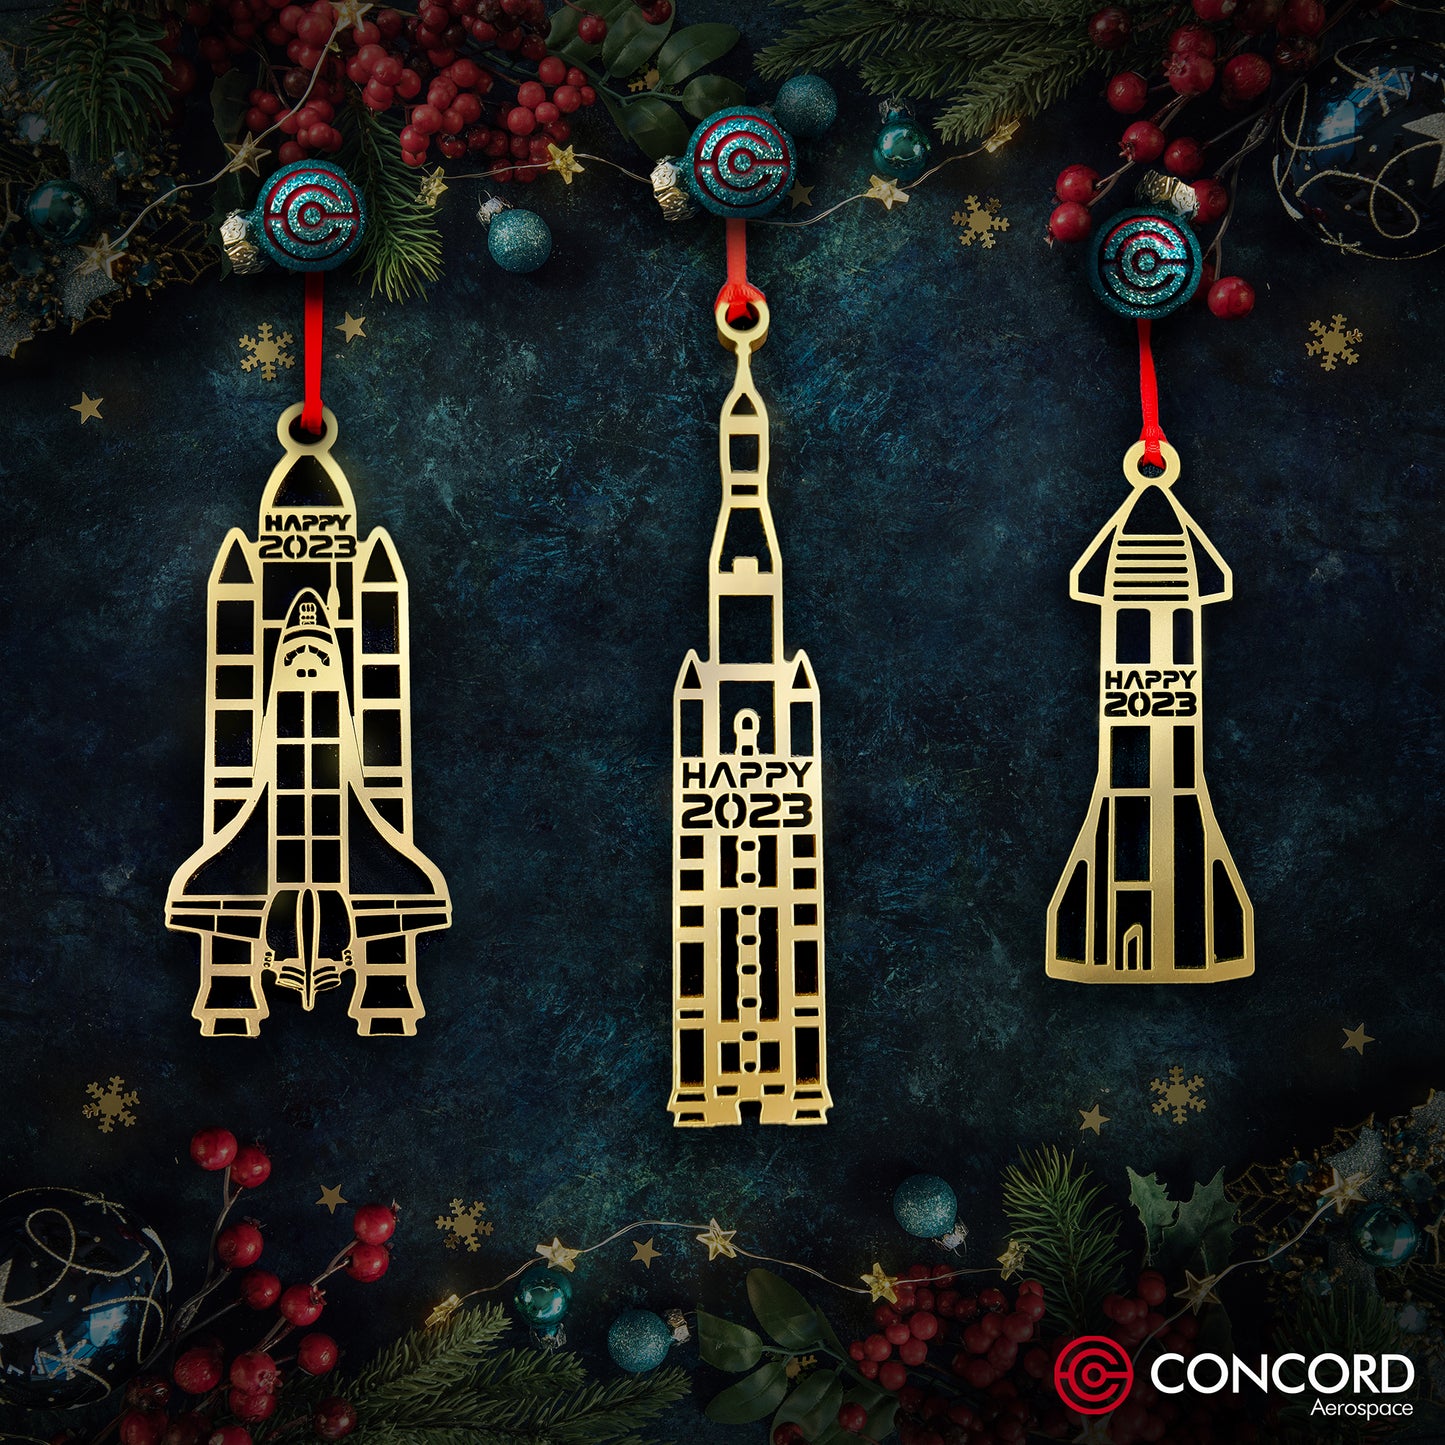 ORION CREW/SERVICE MODULE 2023 LIMITED EDITION TREE ORNAMENT - Concord Aerospace Concord Aerospace Concord Aerospace Holiday Ornament